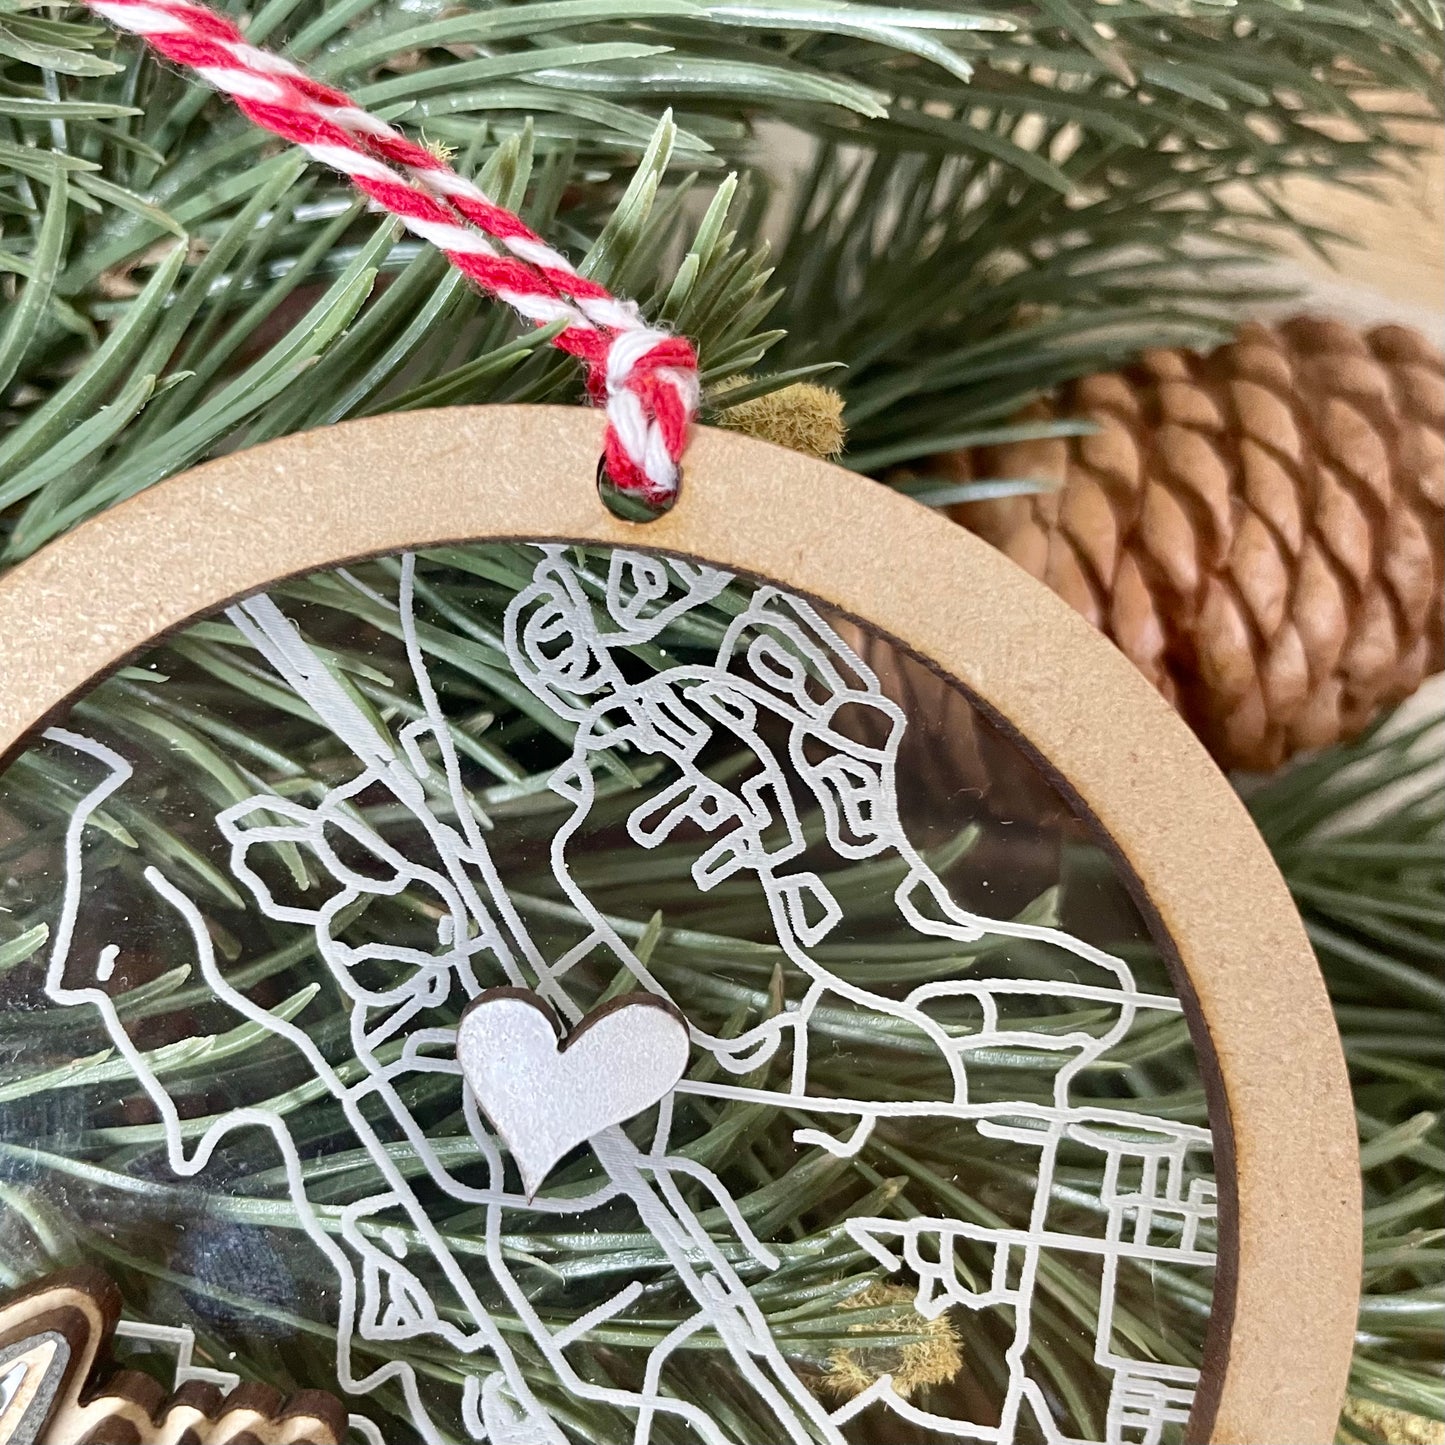 close up of wood an acrylic map ornaments showing engraving